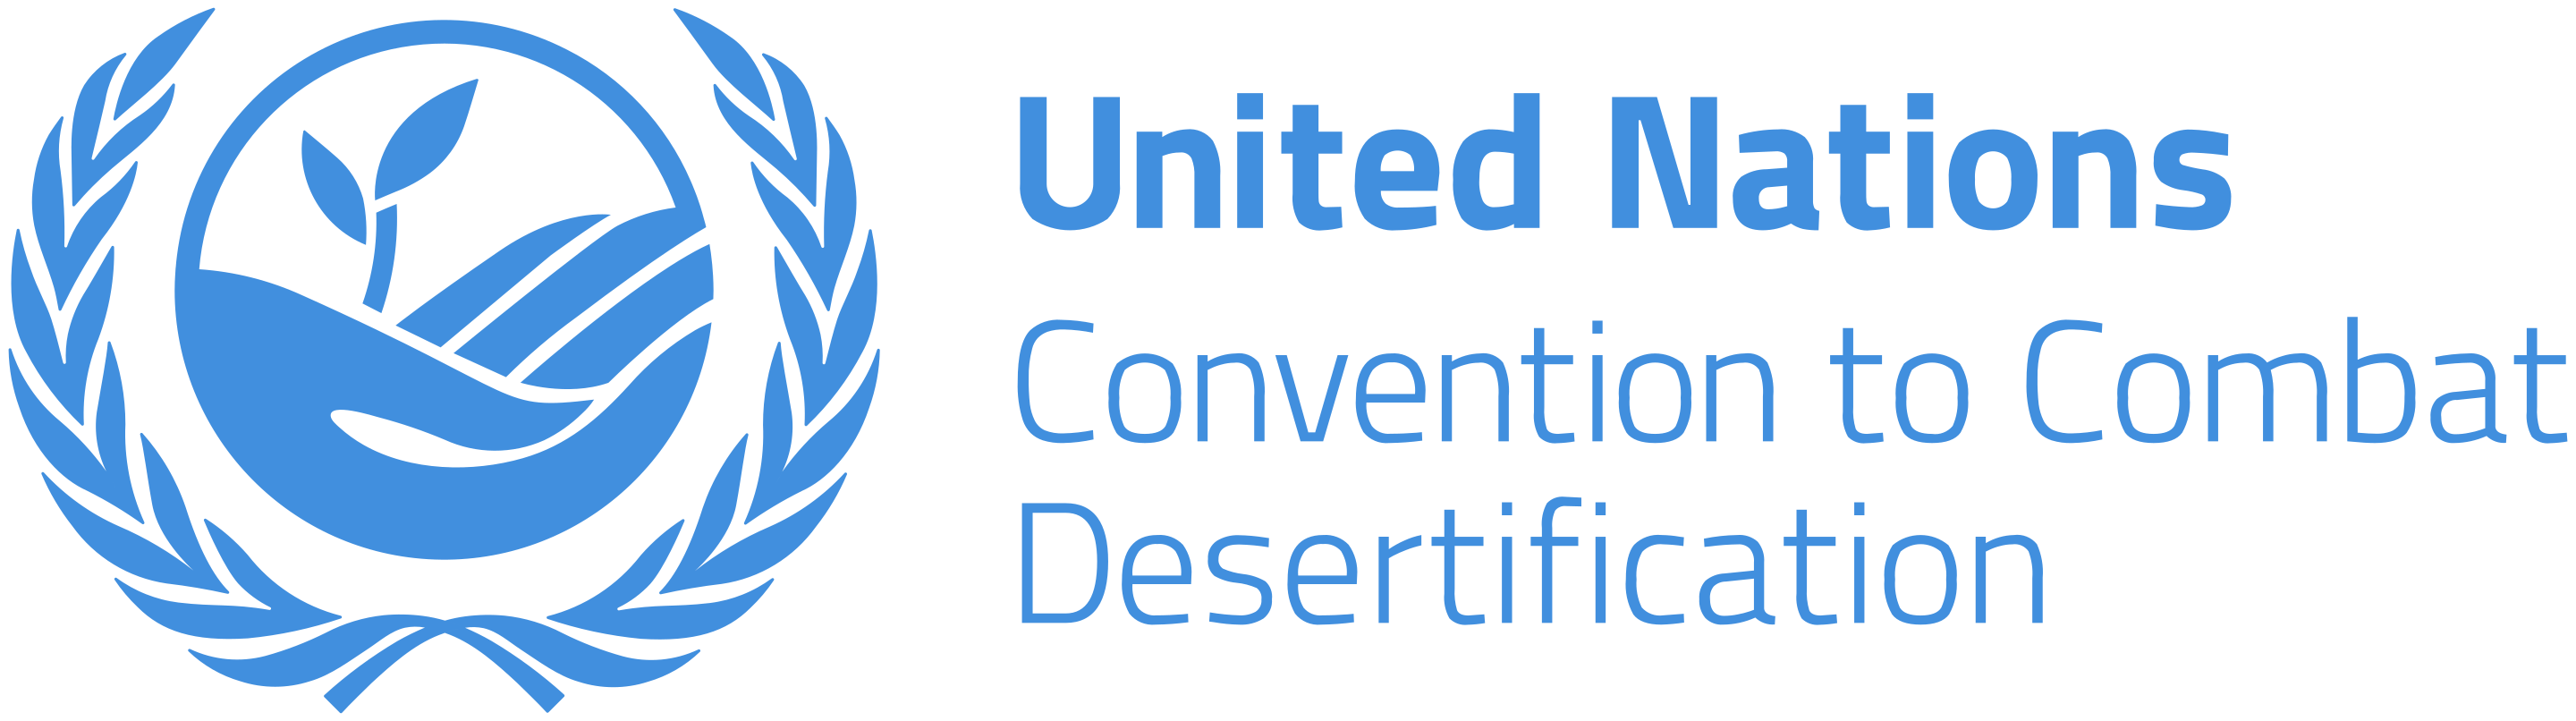 United Nations Convention to Combat Desertification logo